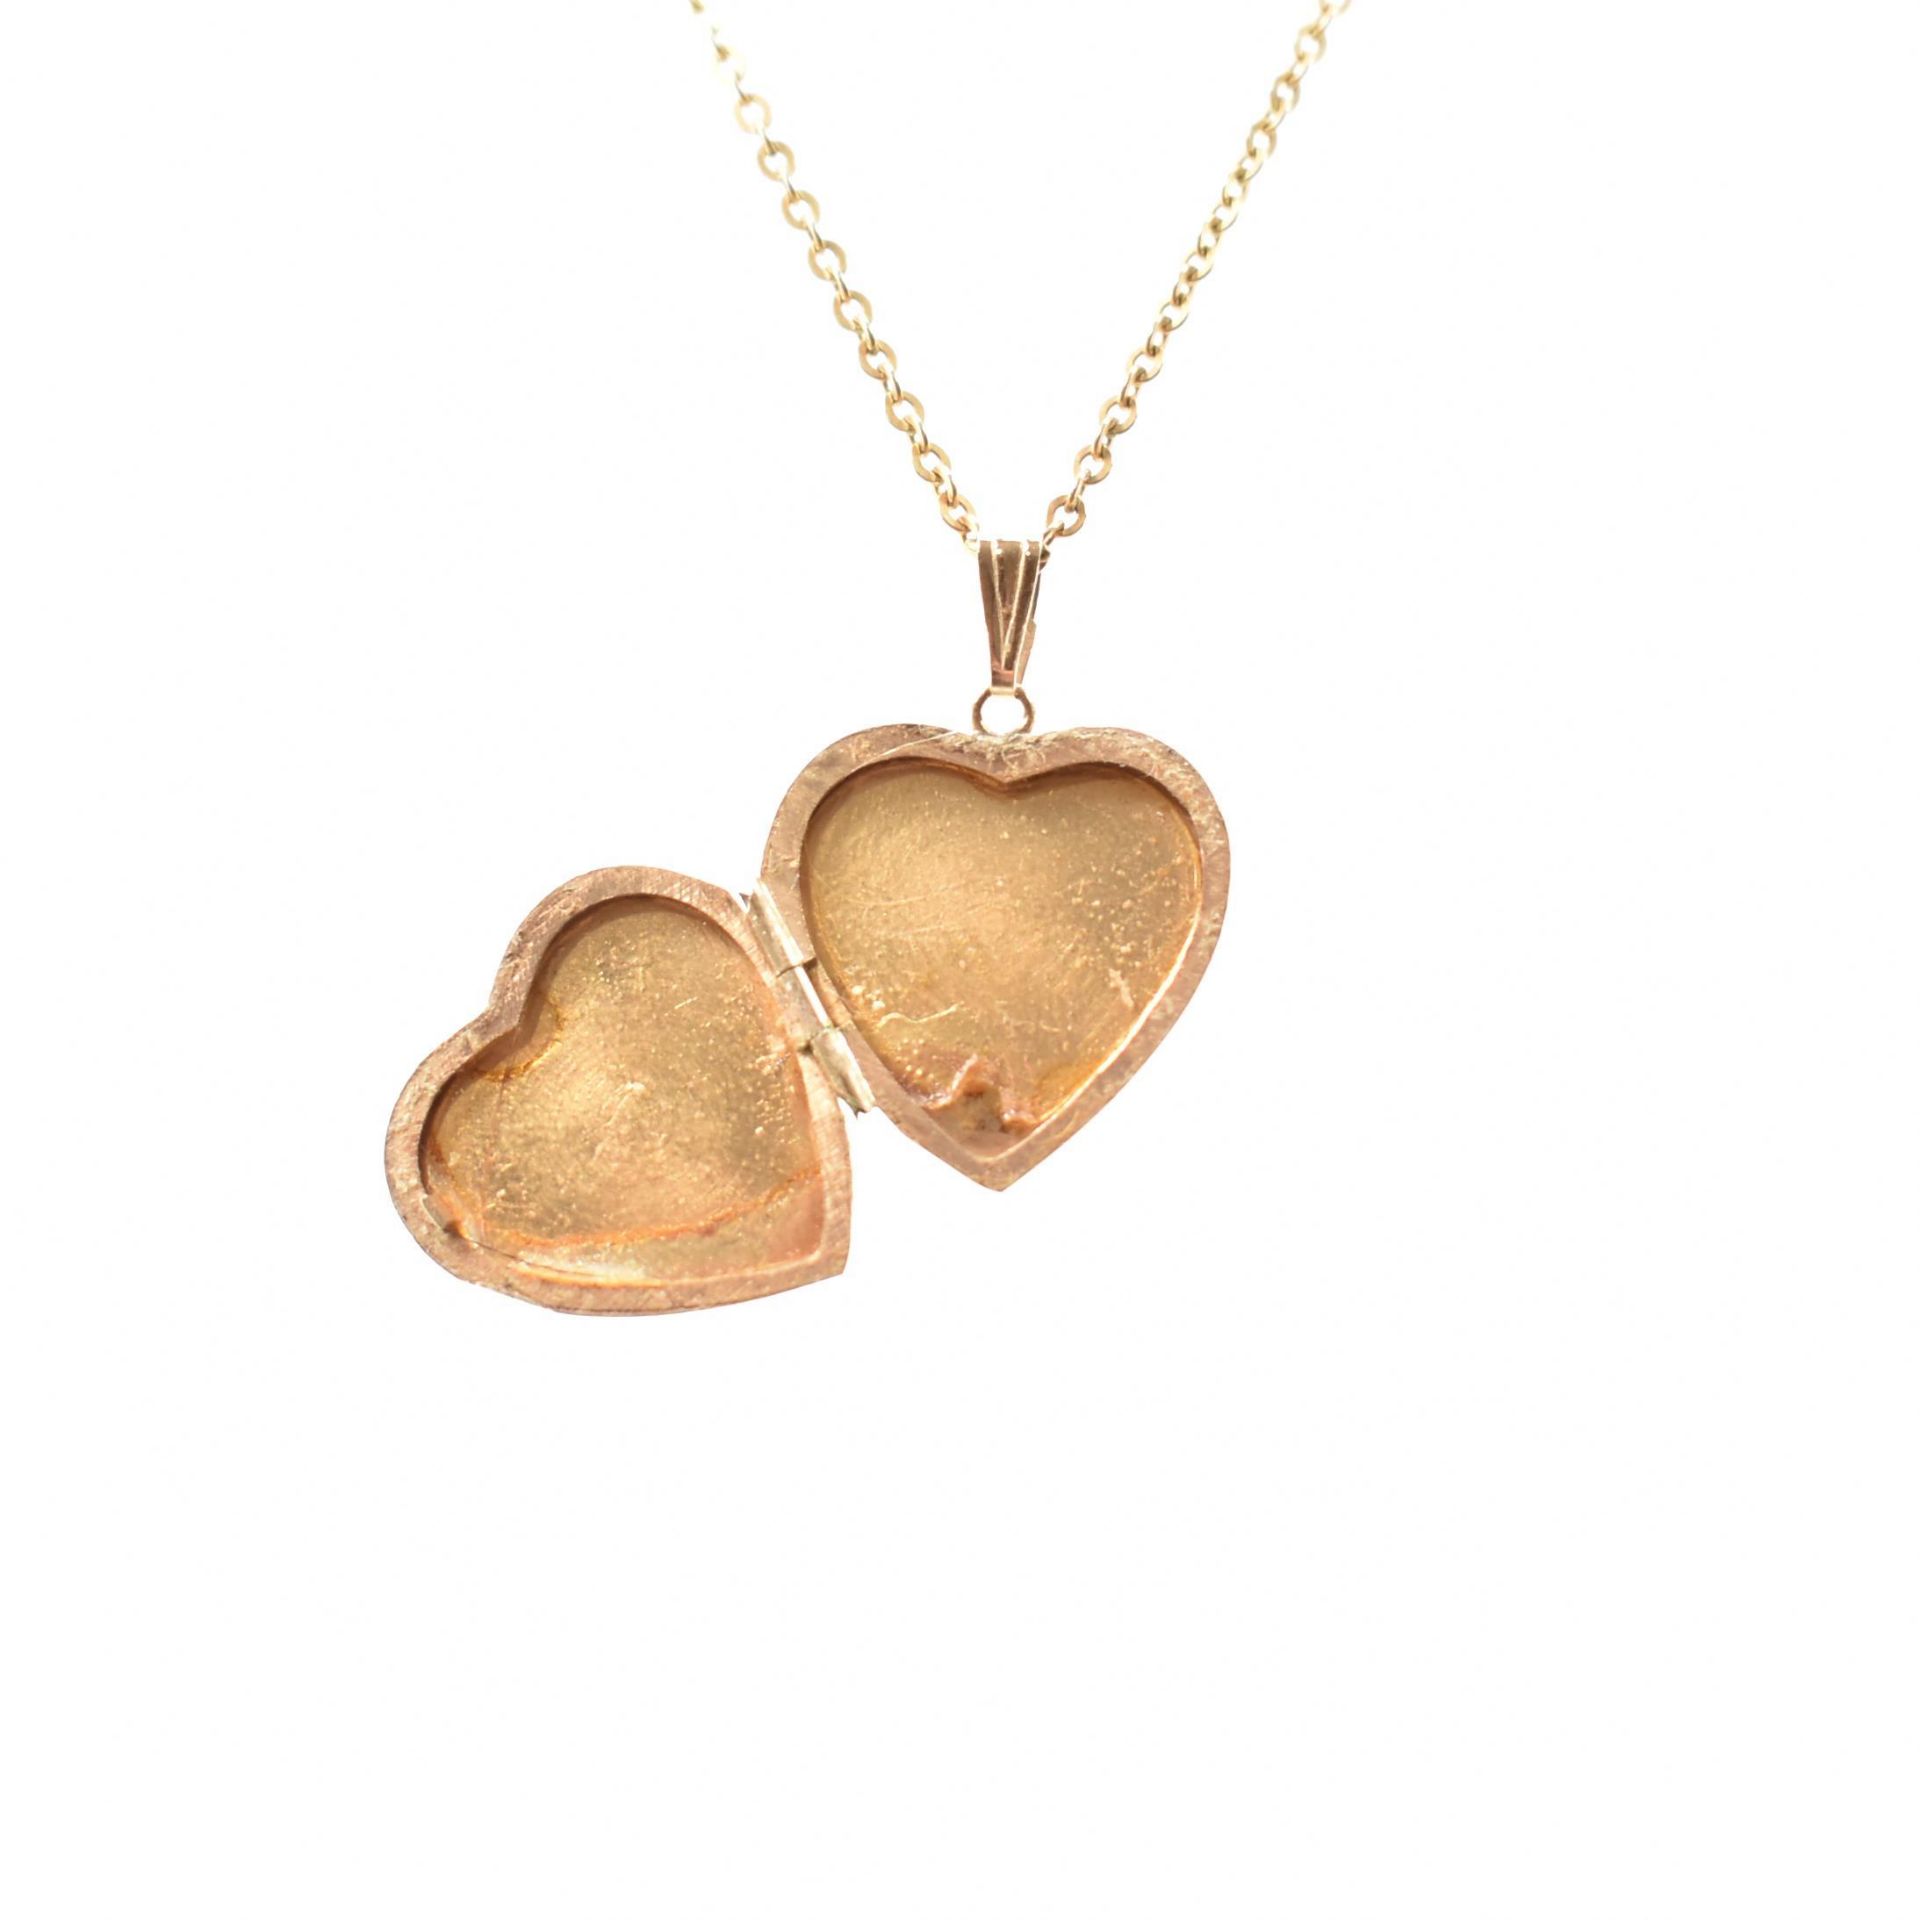 HALLMARKED 9CT GOLD HEART LOCKET & NECKLACE CHAIN - Image 4 of 5